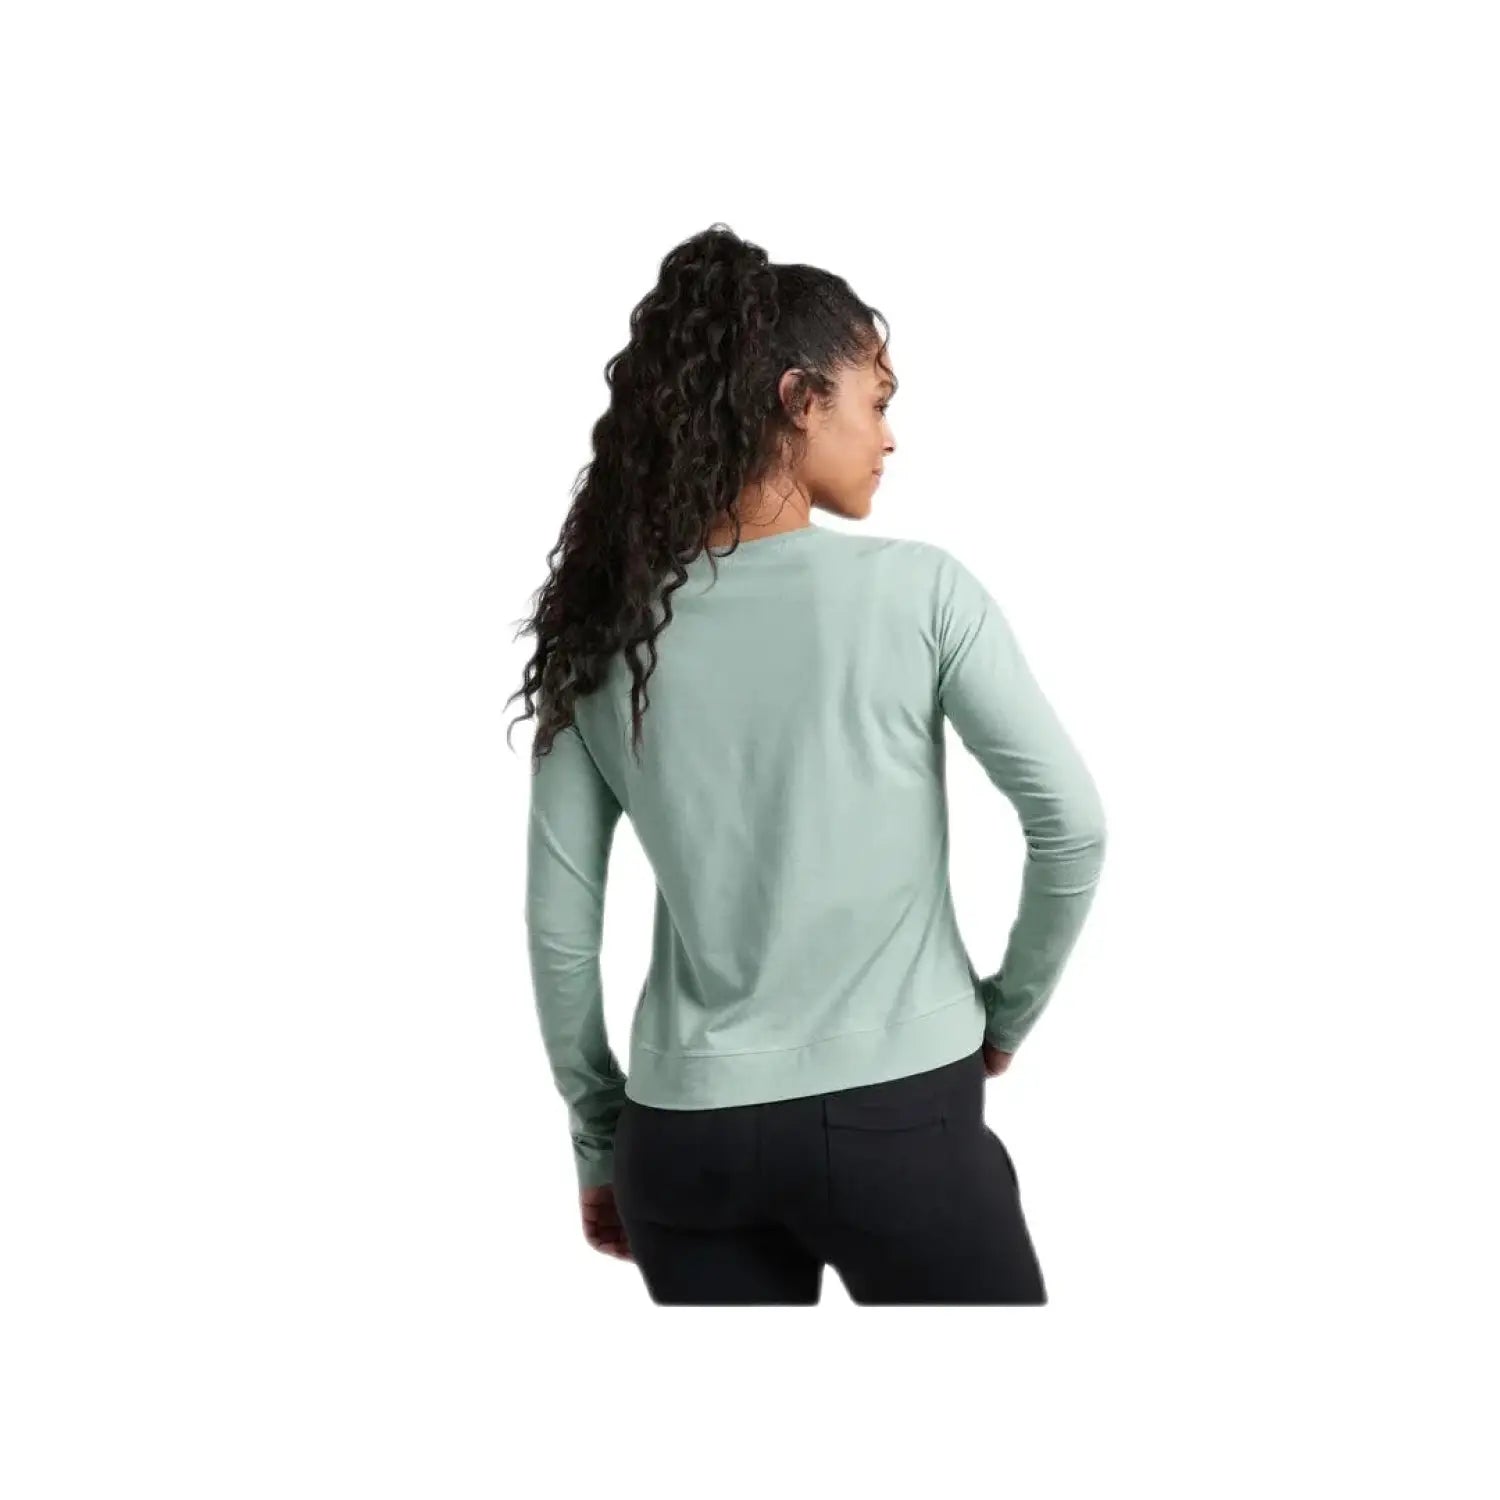 KÜHL Women's SUPRIMA™ Shirt shown in the Agave color option. Back view.